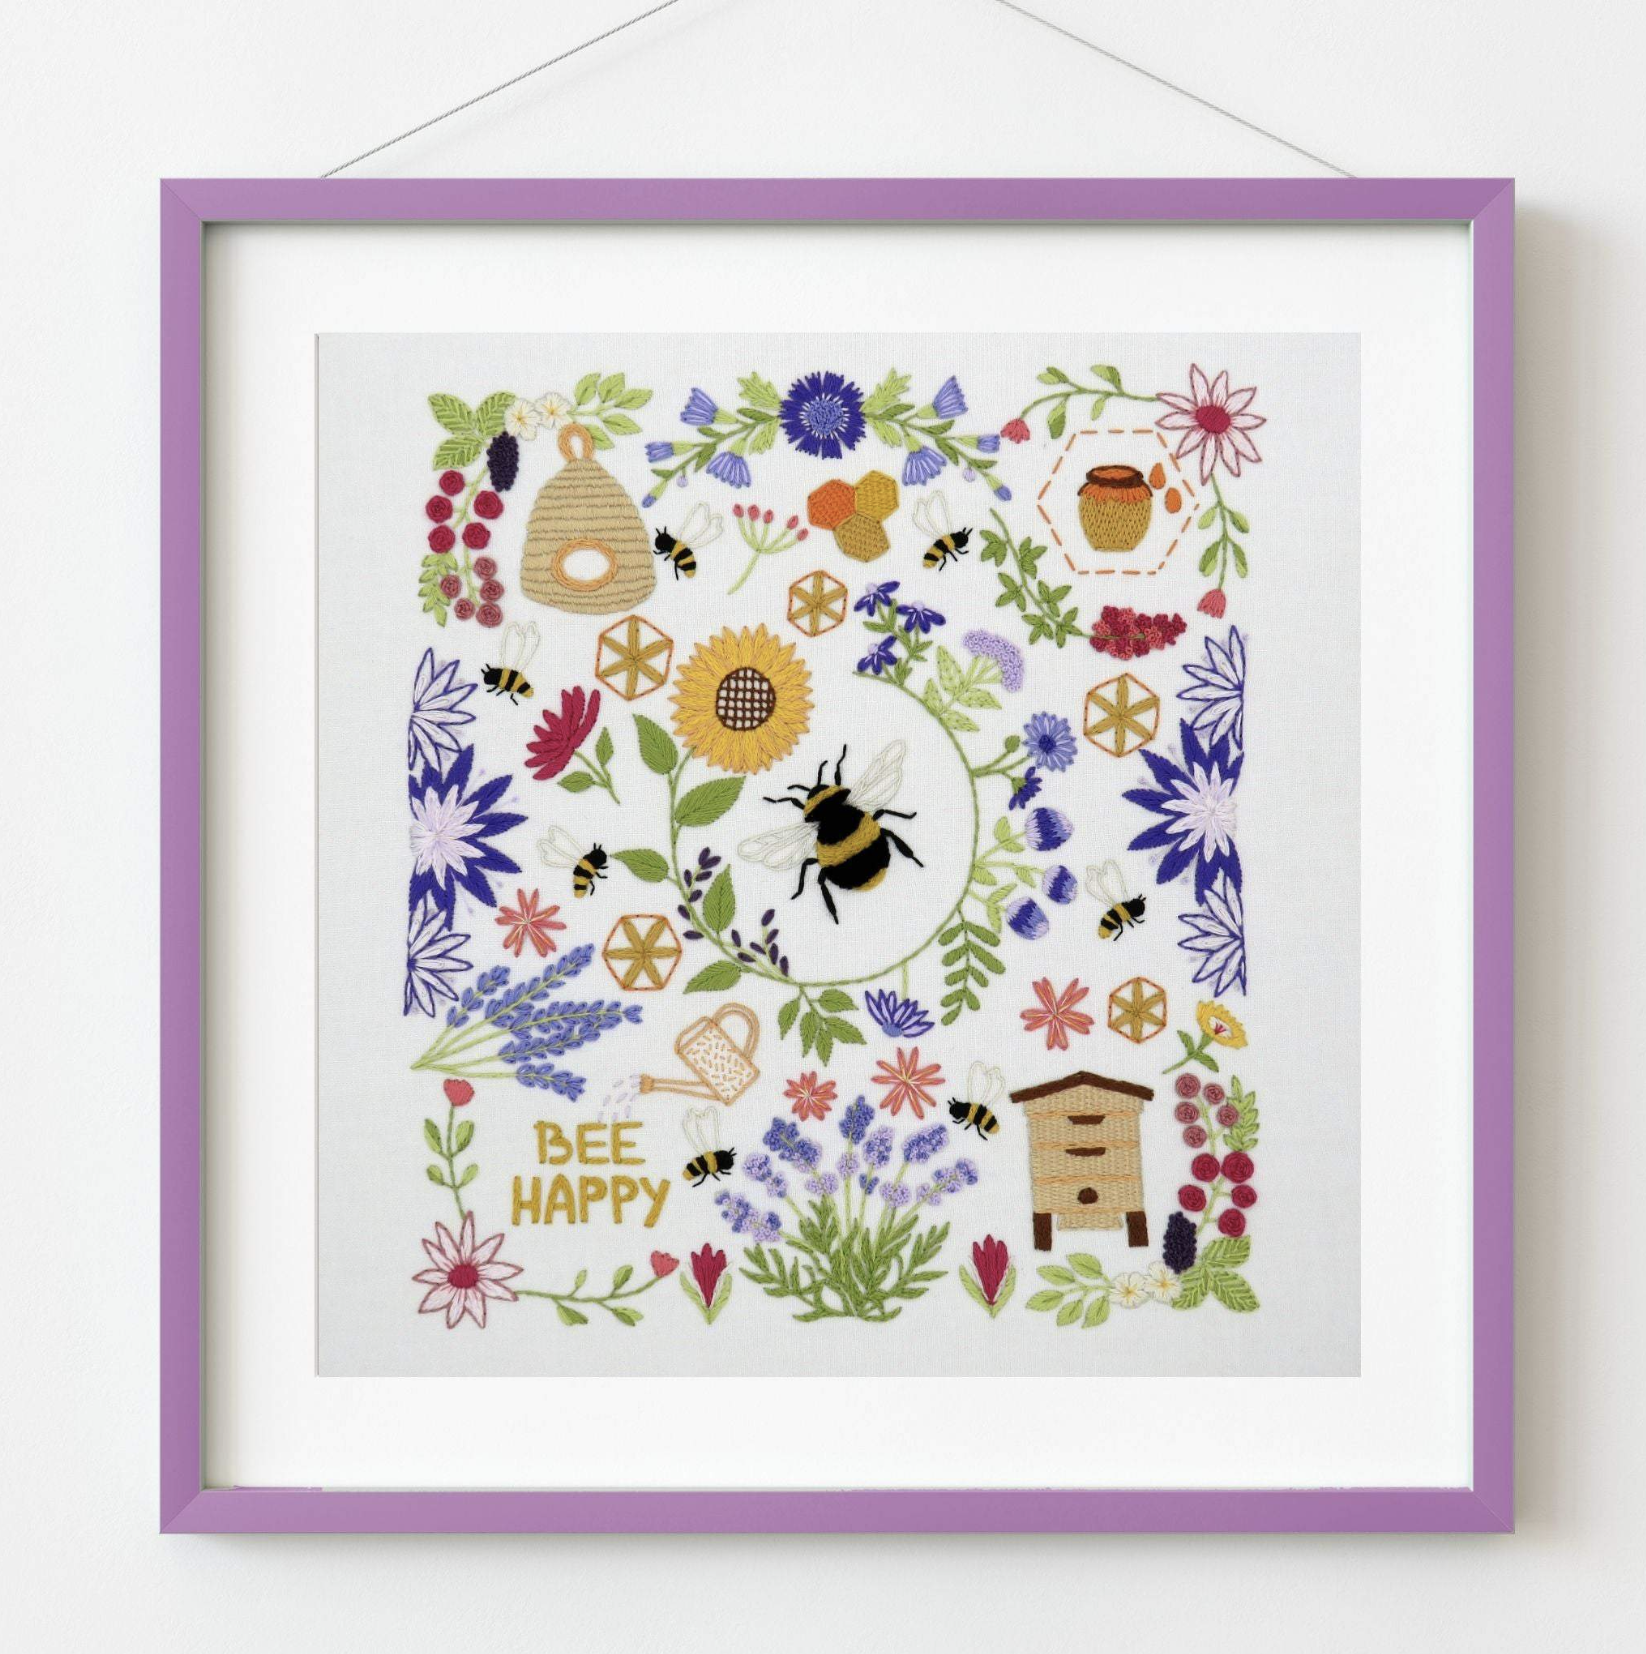 Bees and Blossoms Hand Embroidery Kit